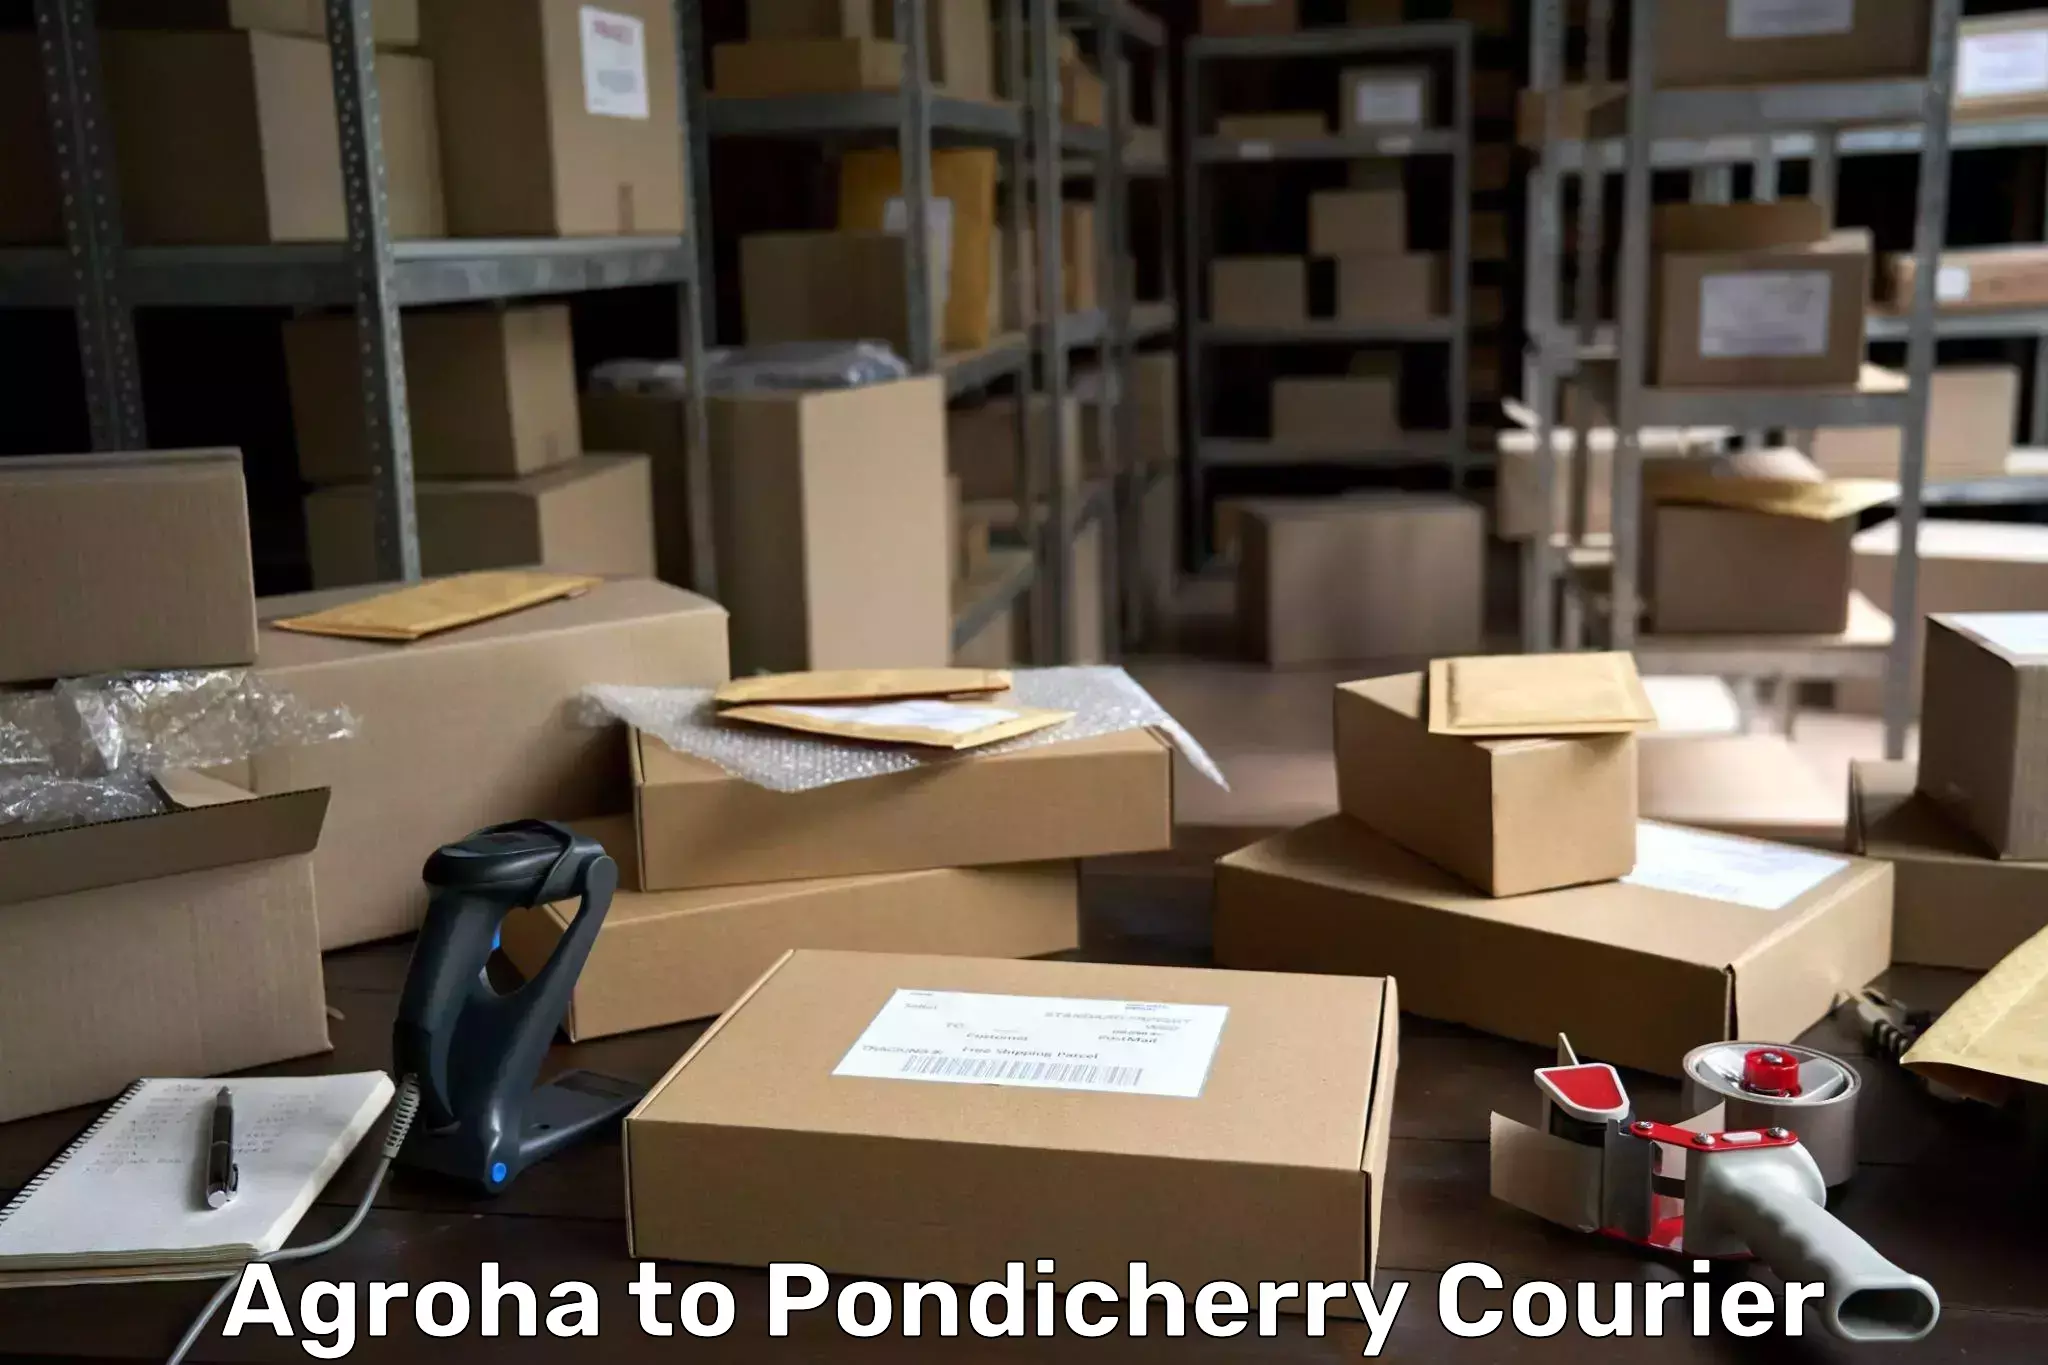 Courier service partnerships Agroha to Pondicherry